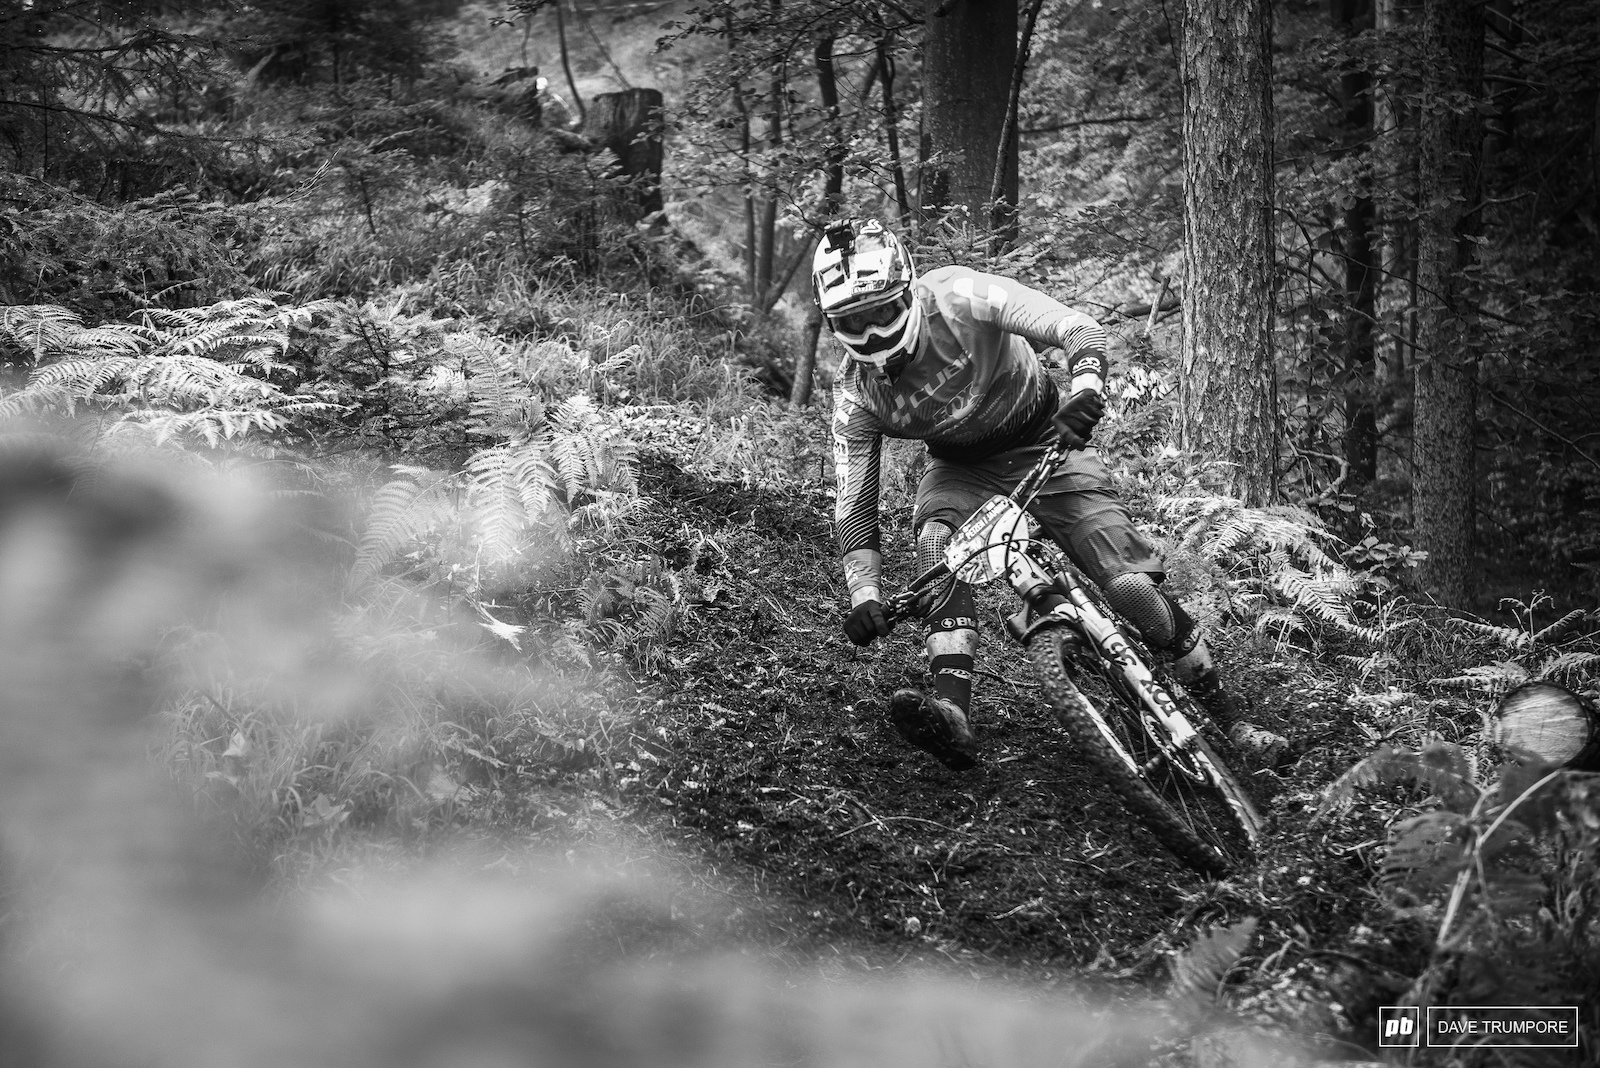 Greg Callaghan rails the fresh and fluffy loam on Stage 4.